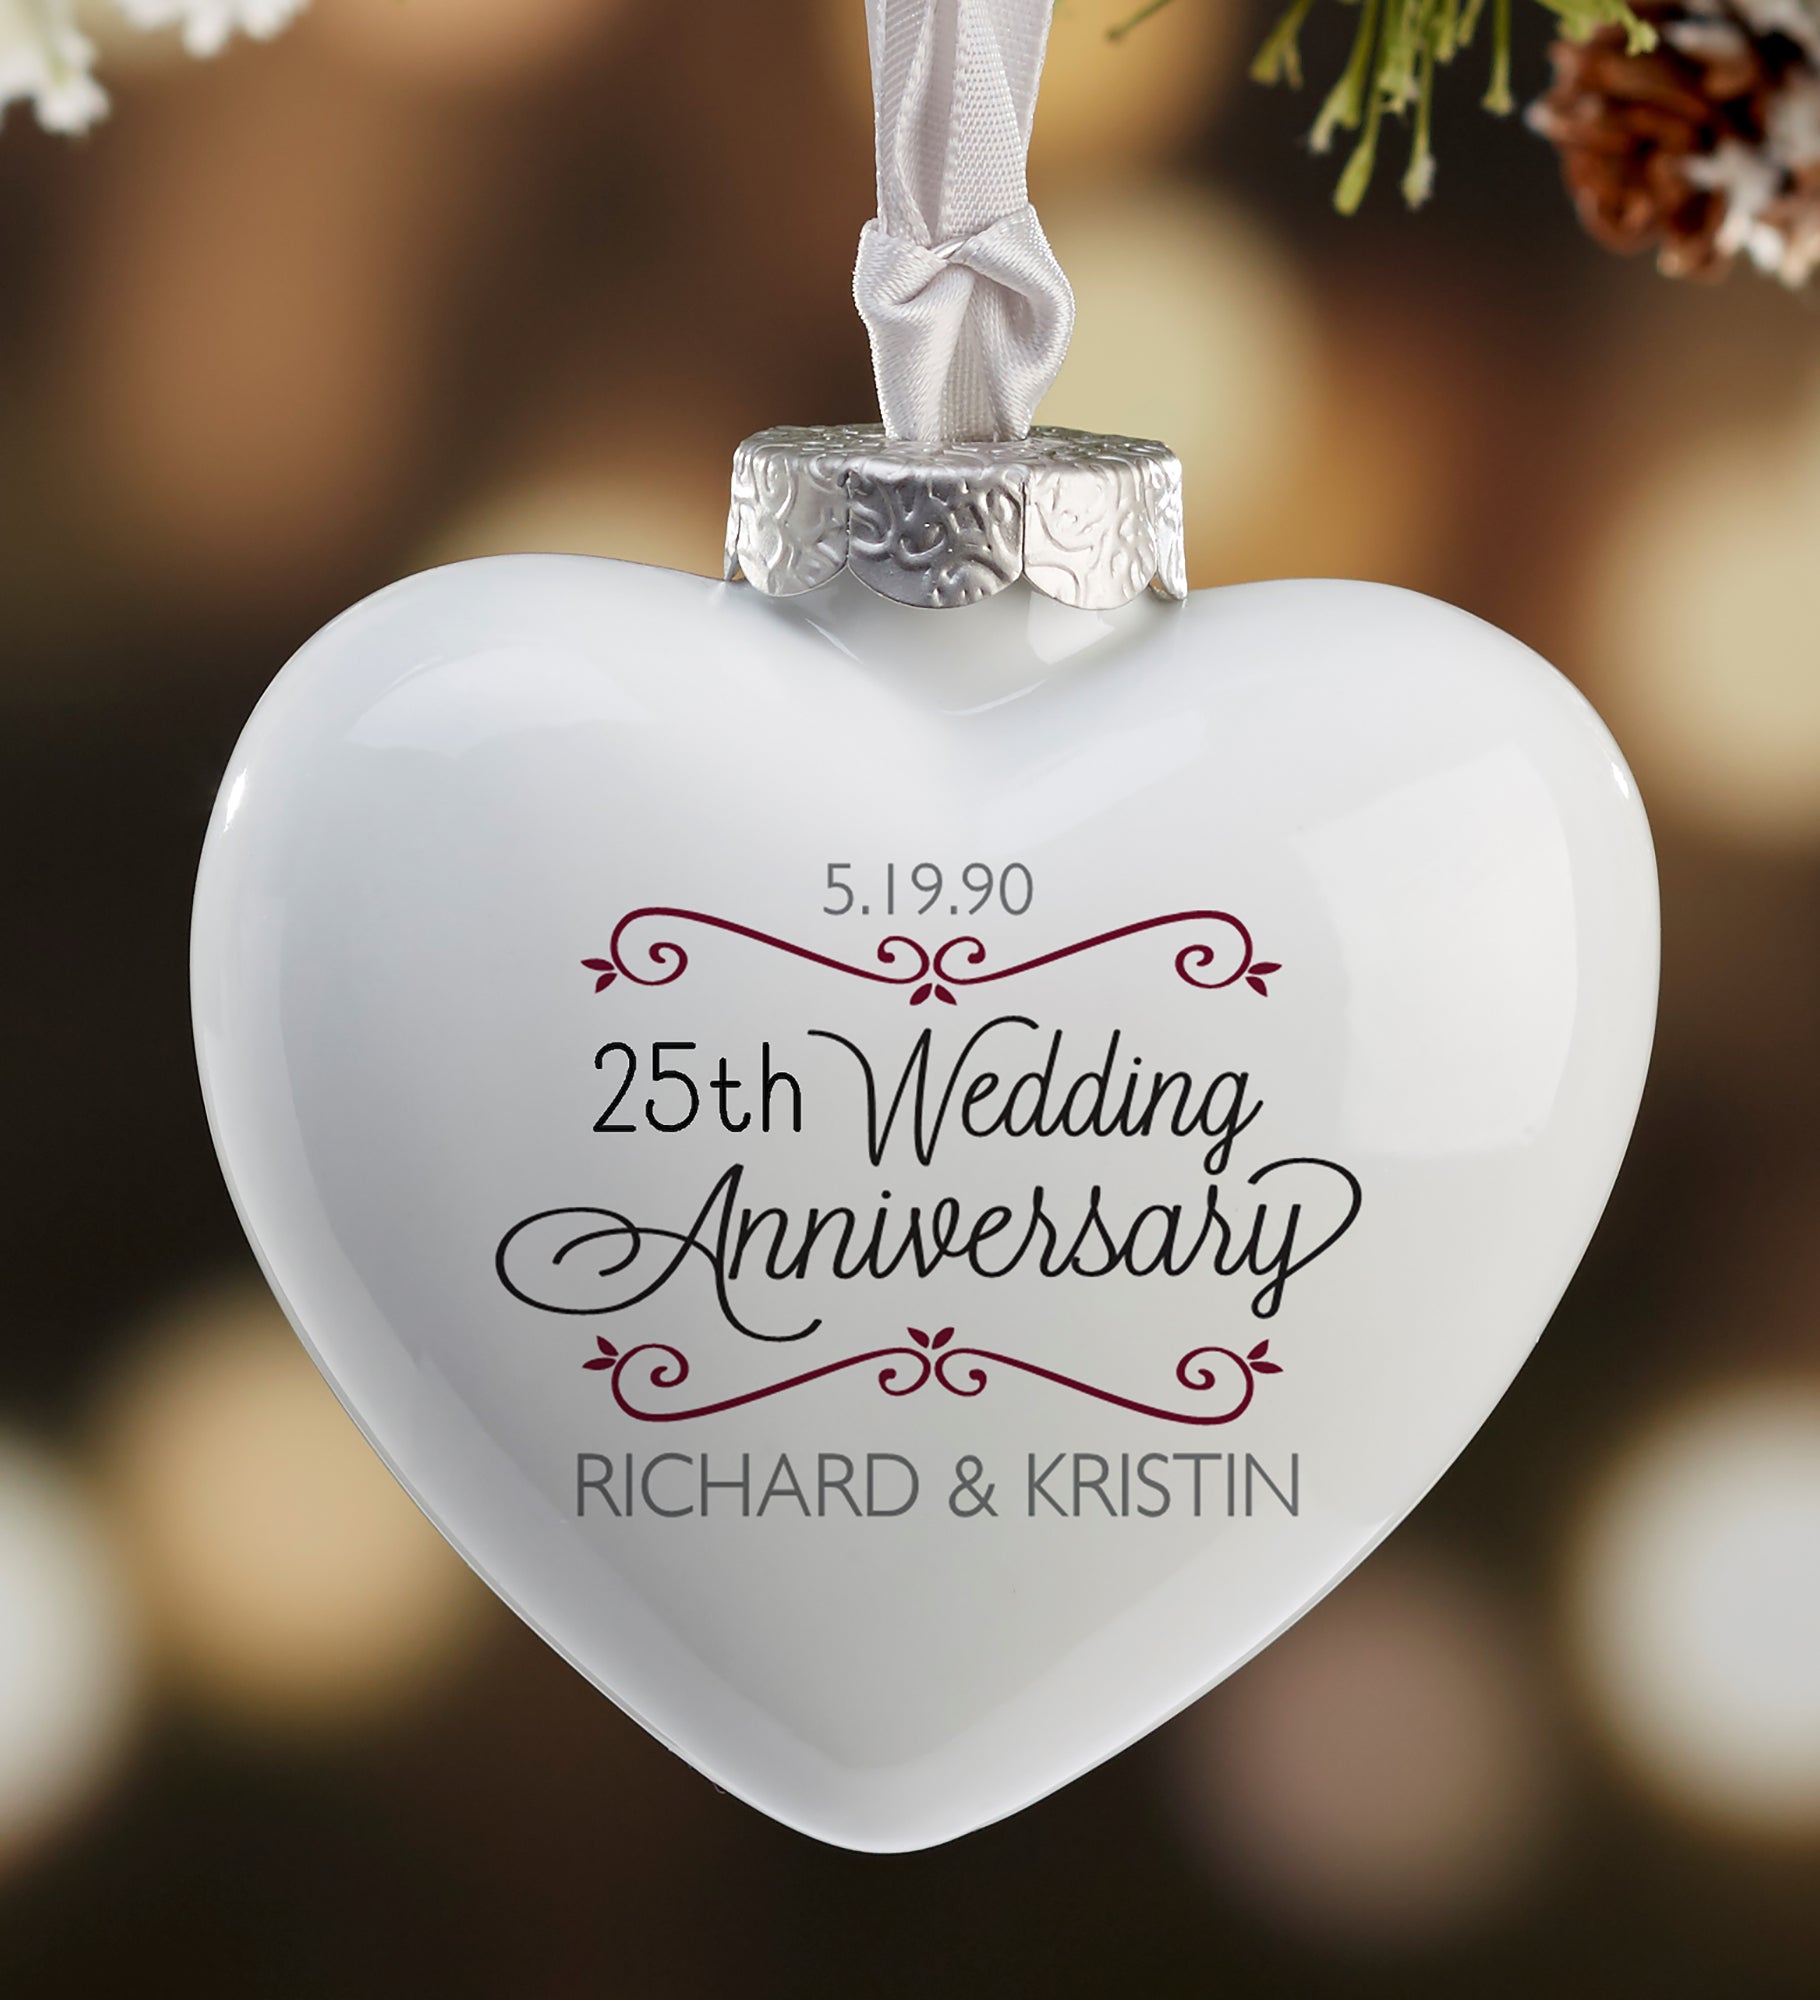 Anniversary Wishes Personalized Deluxe Heart Ornament